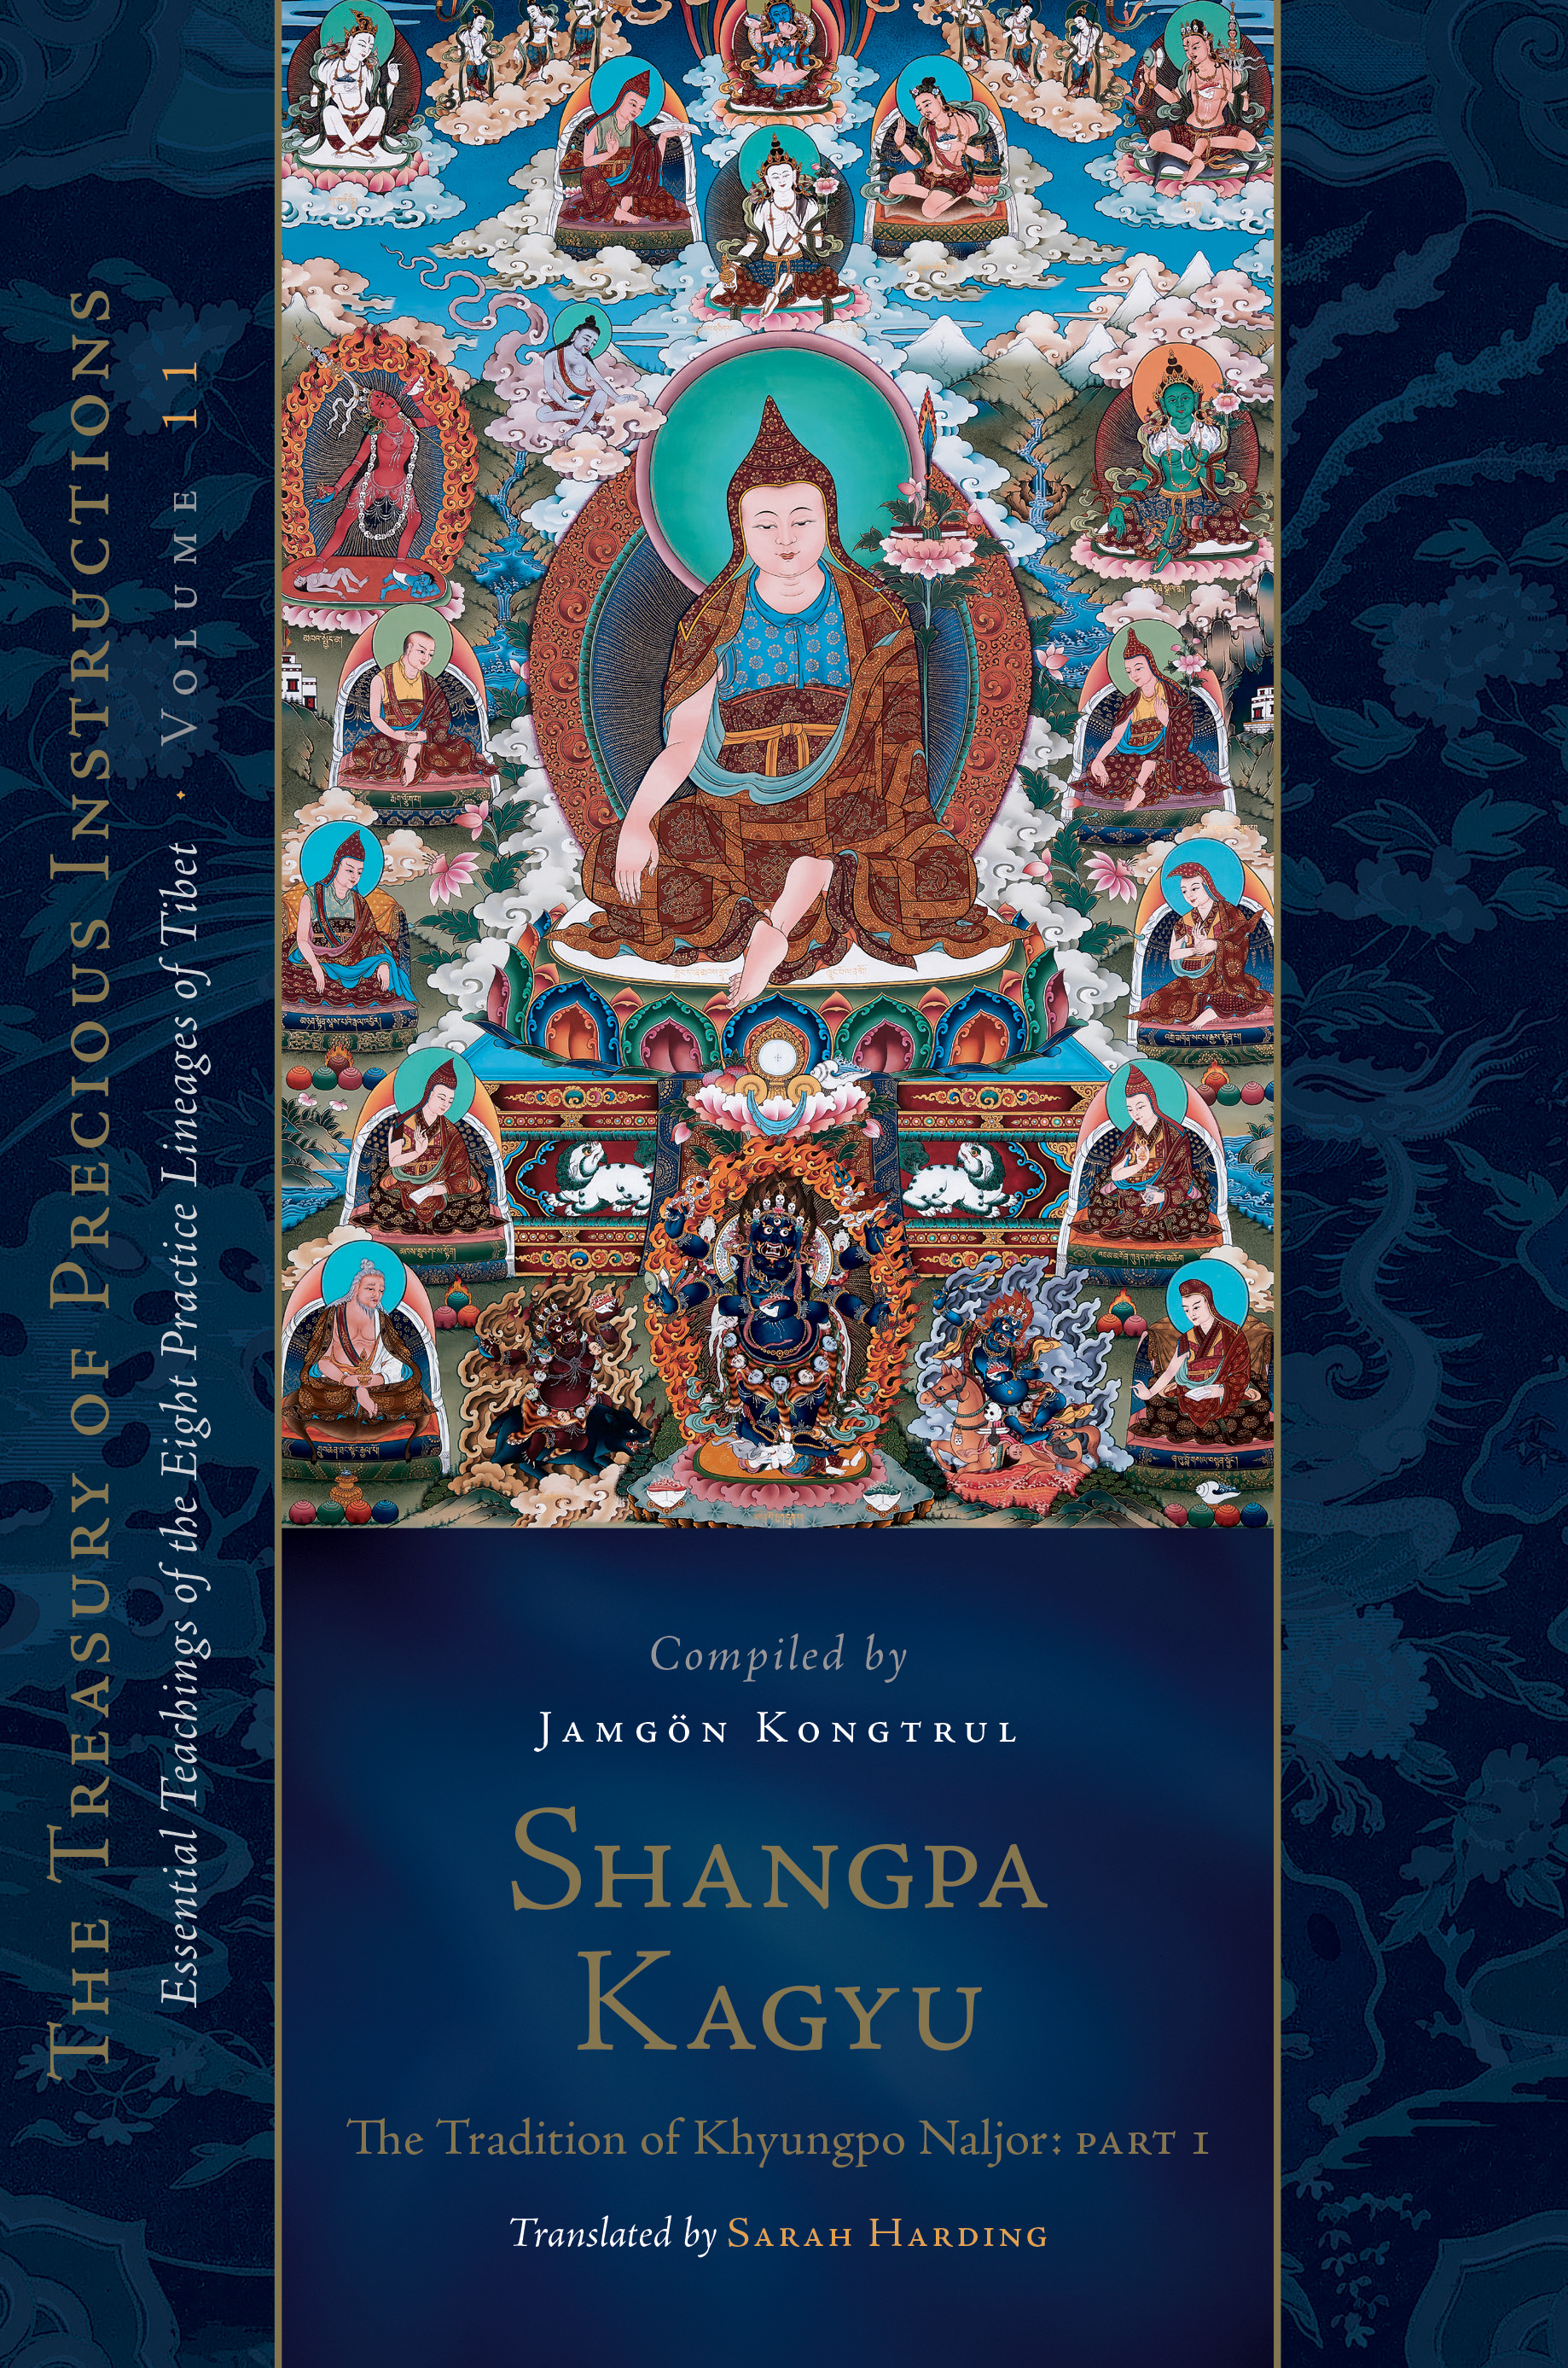 Shangpa Kagyu: The Tradition of Khyungpo Naljor : Essential Teachings of the Eight Practice Lineages of Tibet, Volume 11 (The Treasury of Precious Instructions) | Thayé, Jamgön Kongtrul Lodr